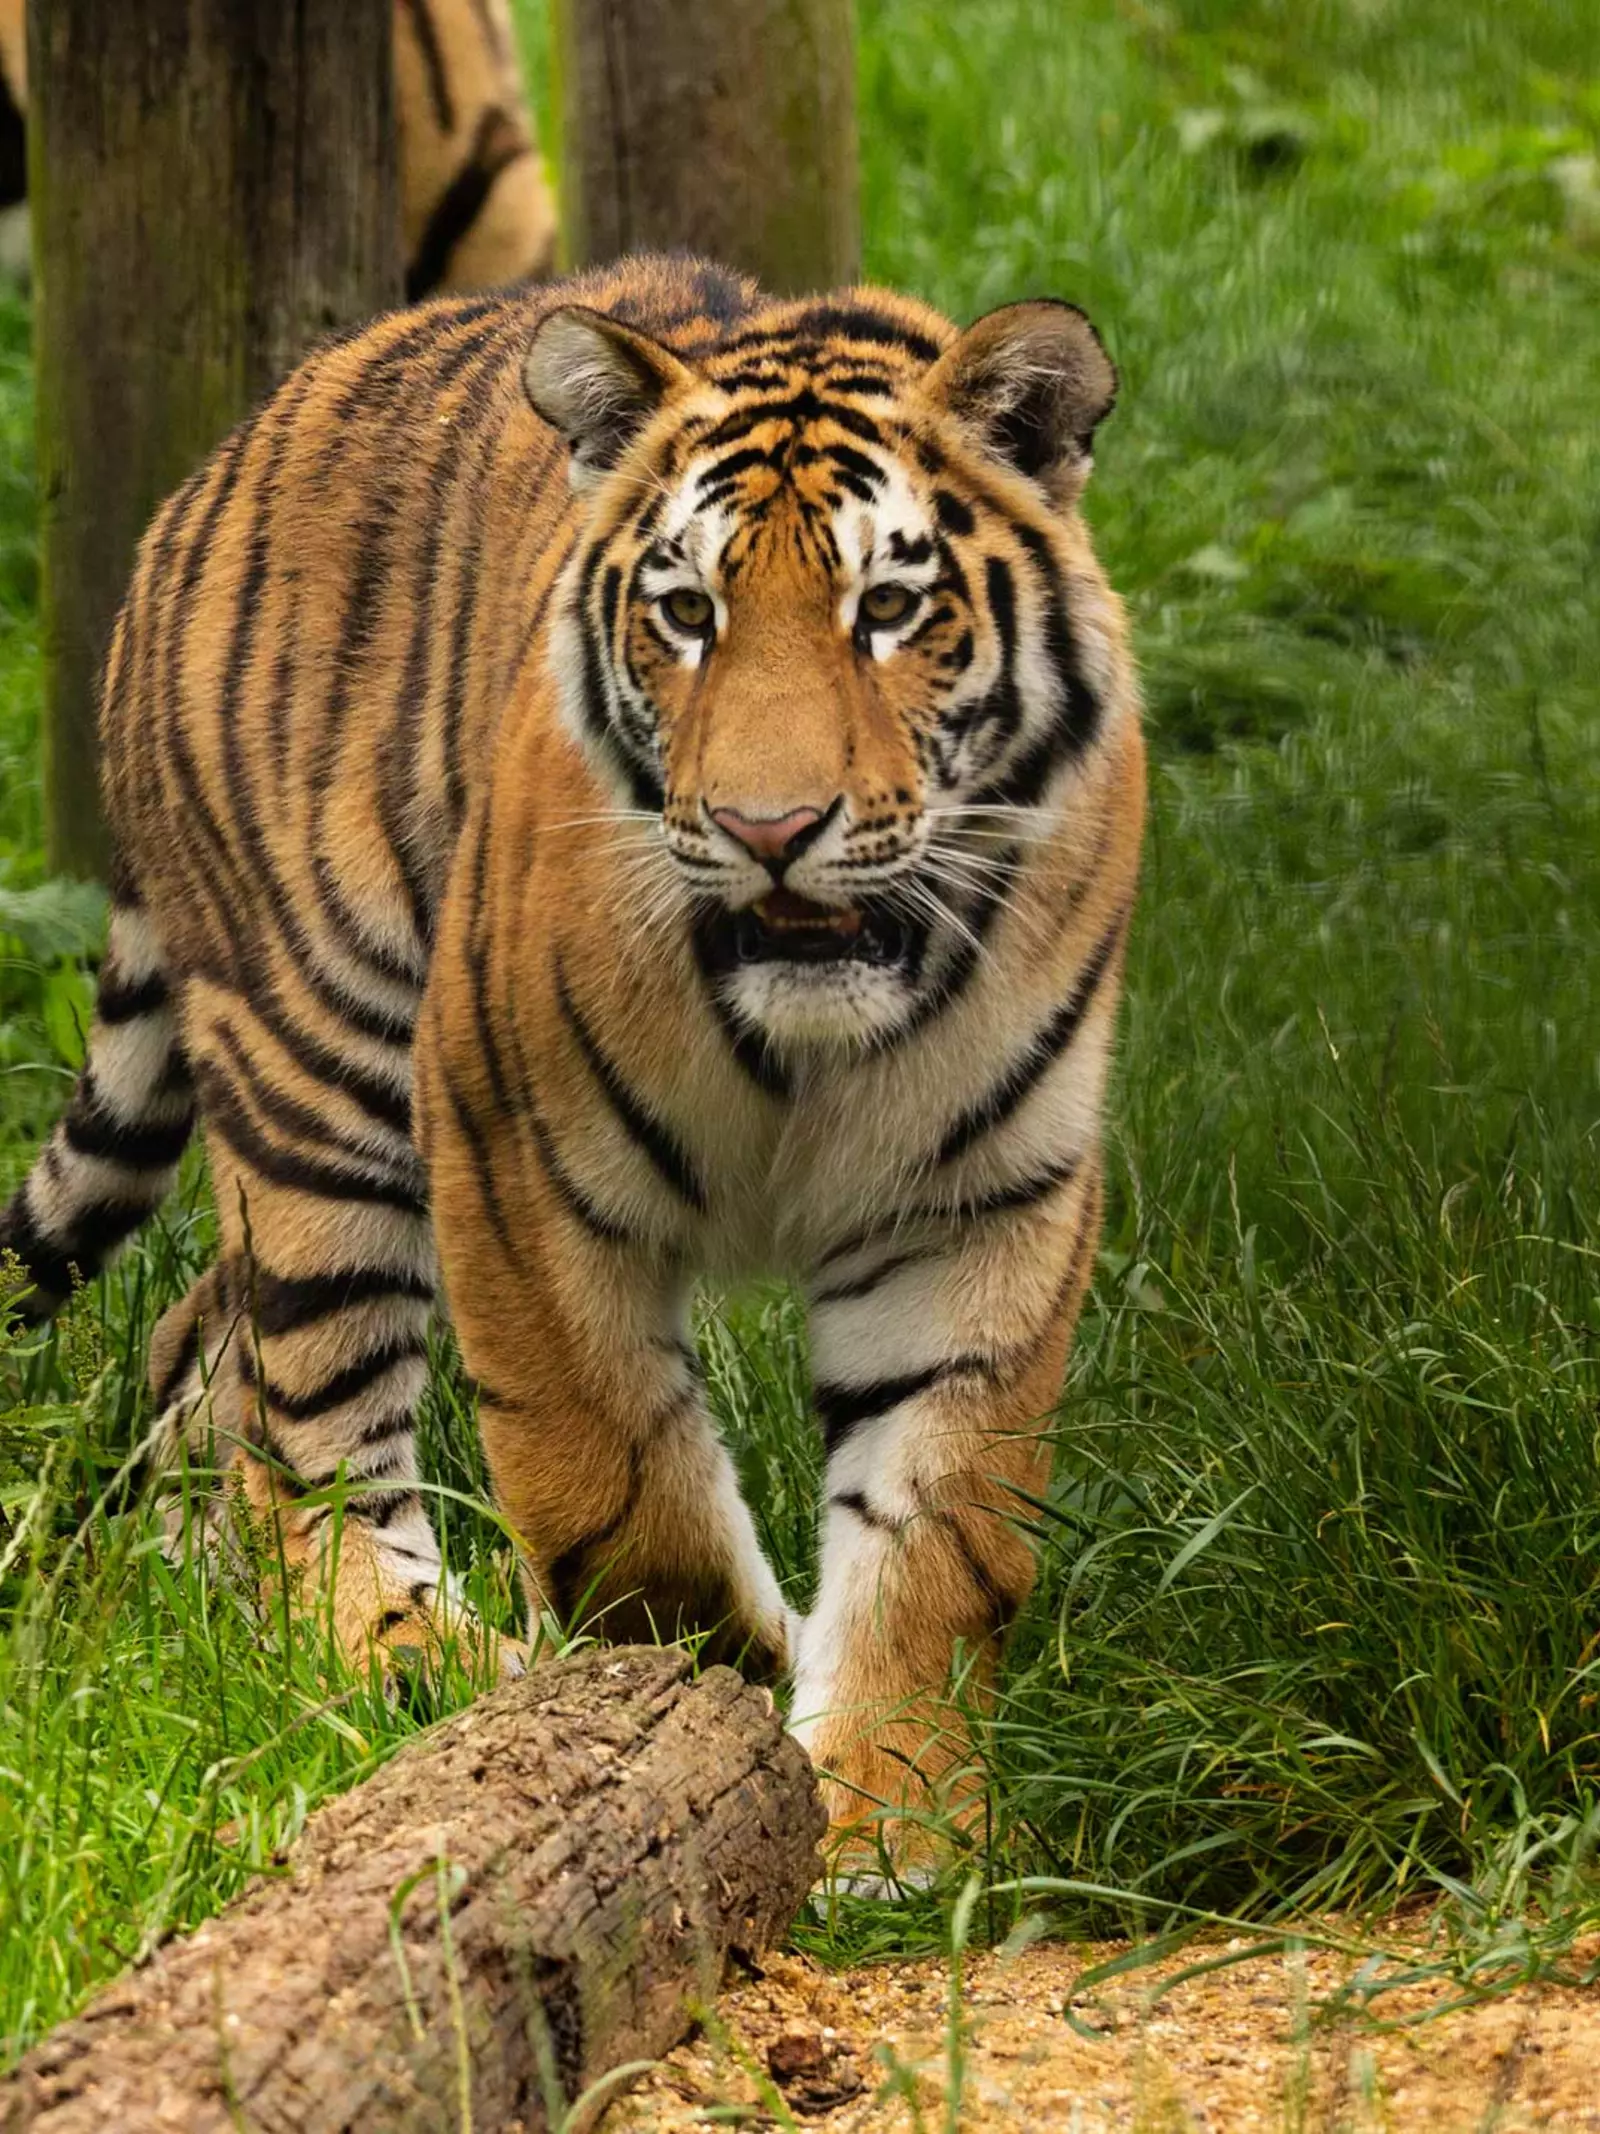 Amur tiger at Whipsnade Zoo